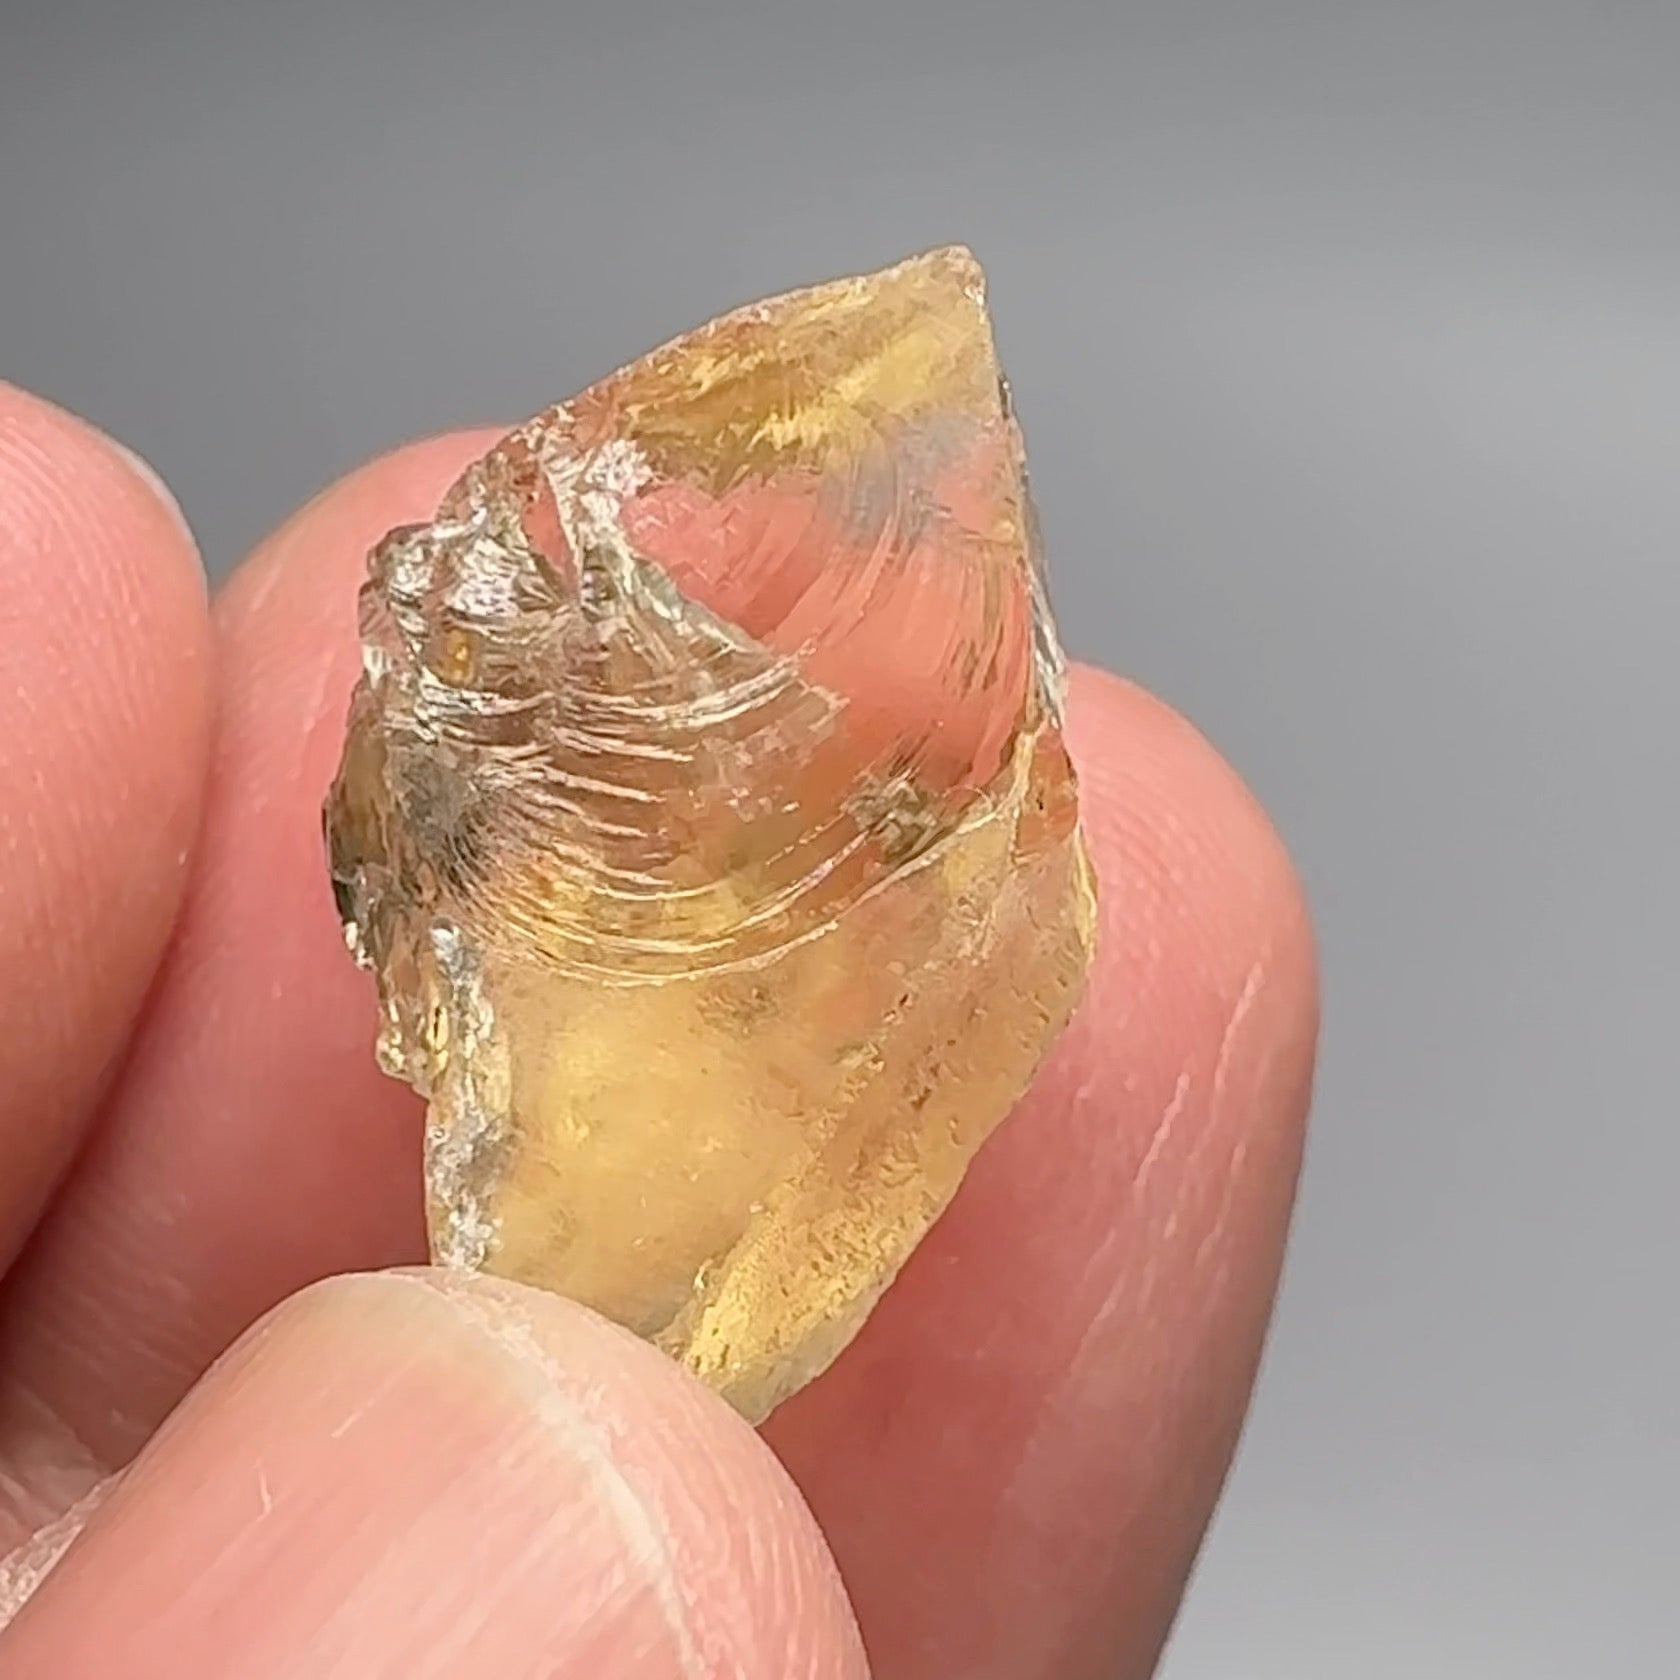 26.79ct Citrine, Zambia, Untreated Unheated, slight issues on outside, rest VVS-IF